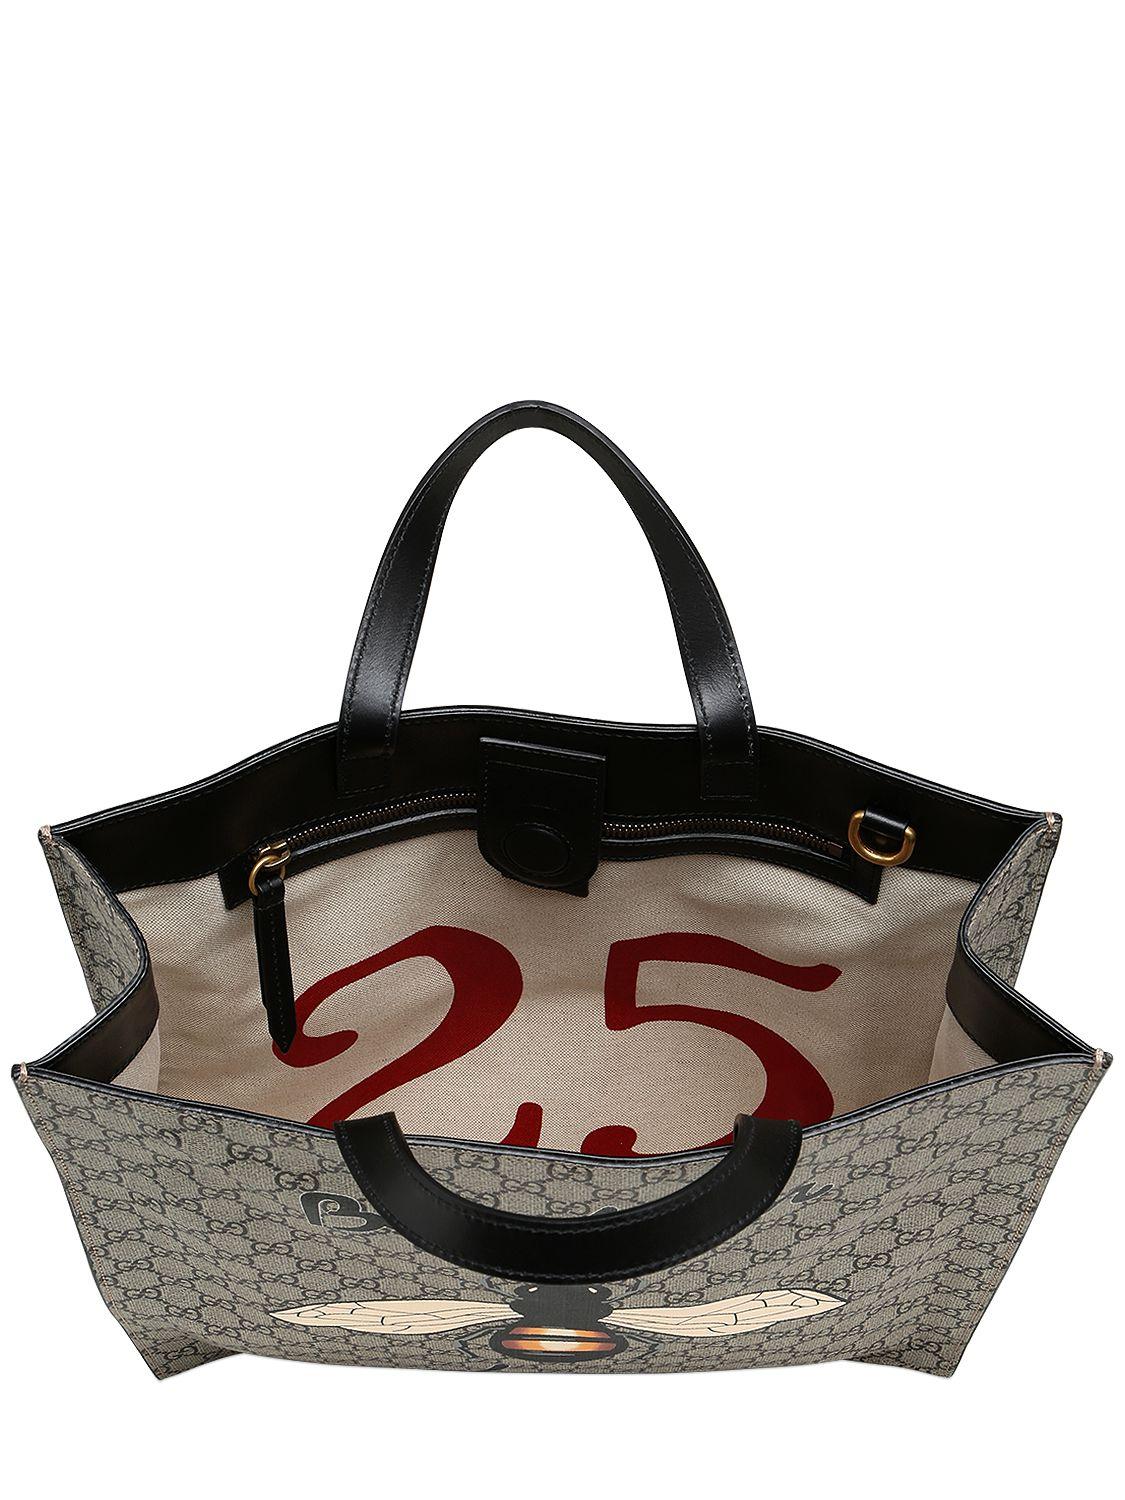 Lyst - Gucci Bee Print Gg Supple Tote Bag in Natural